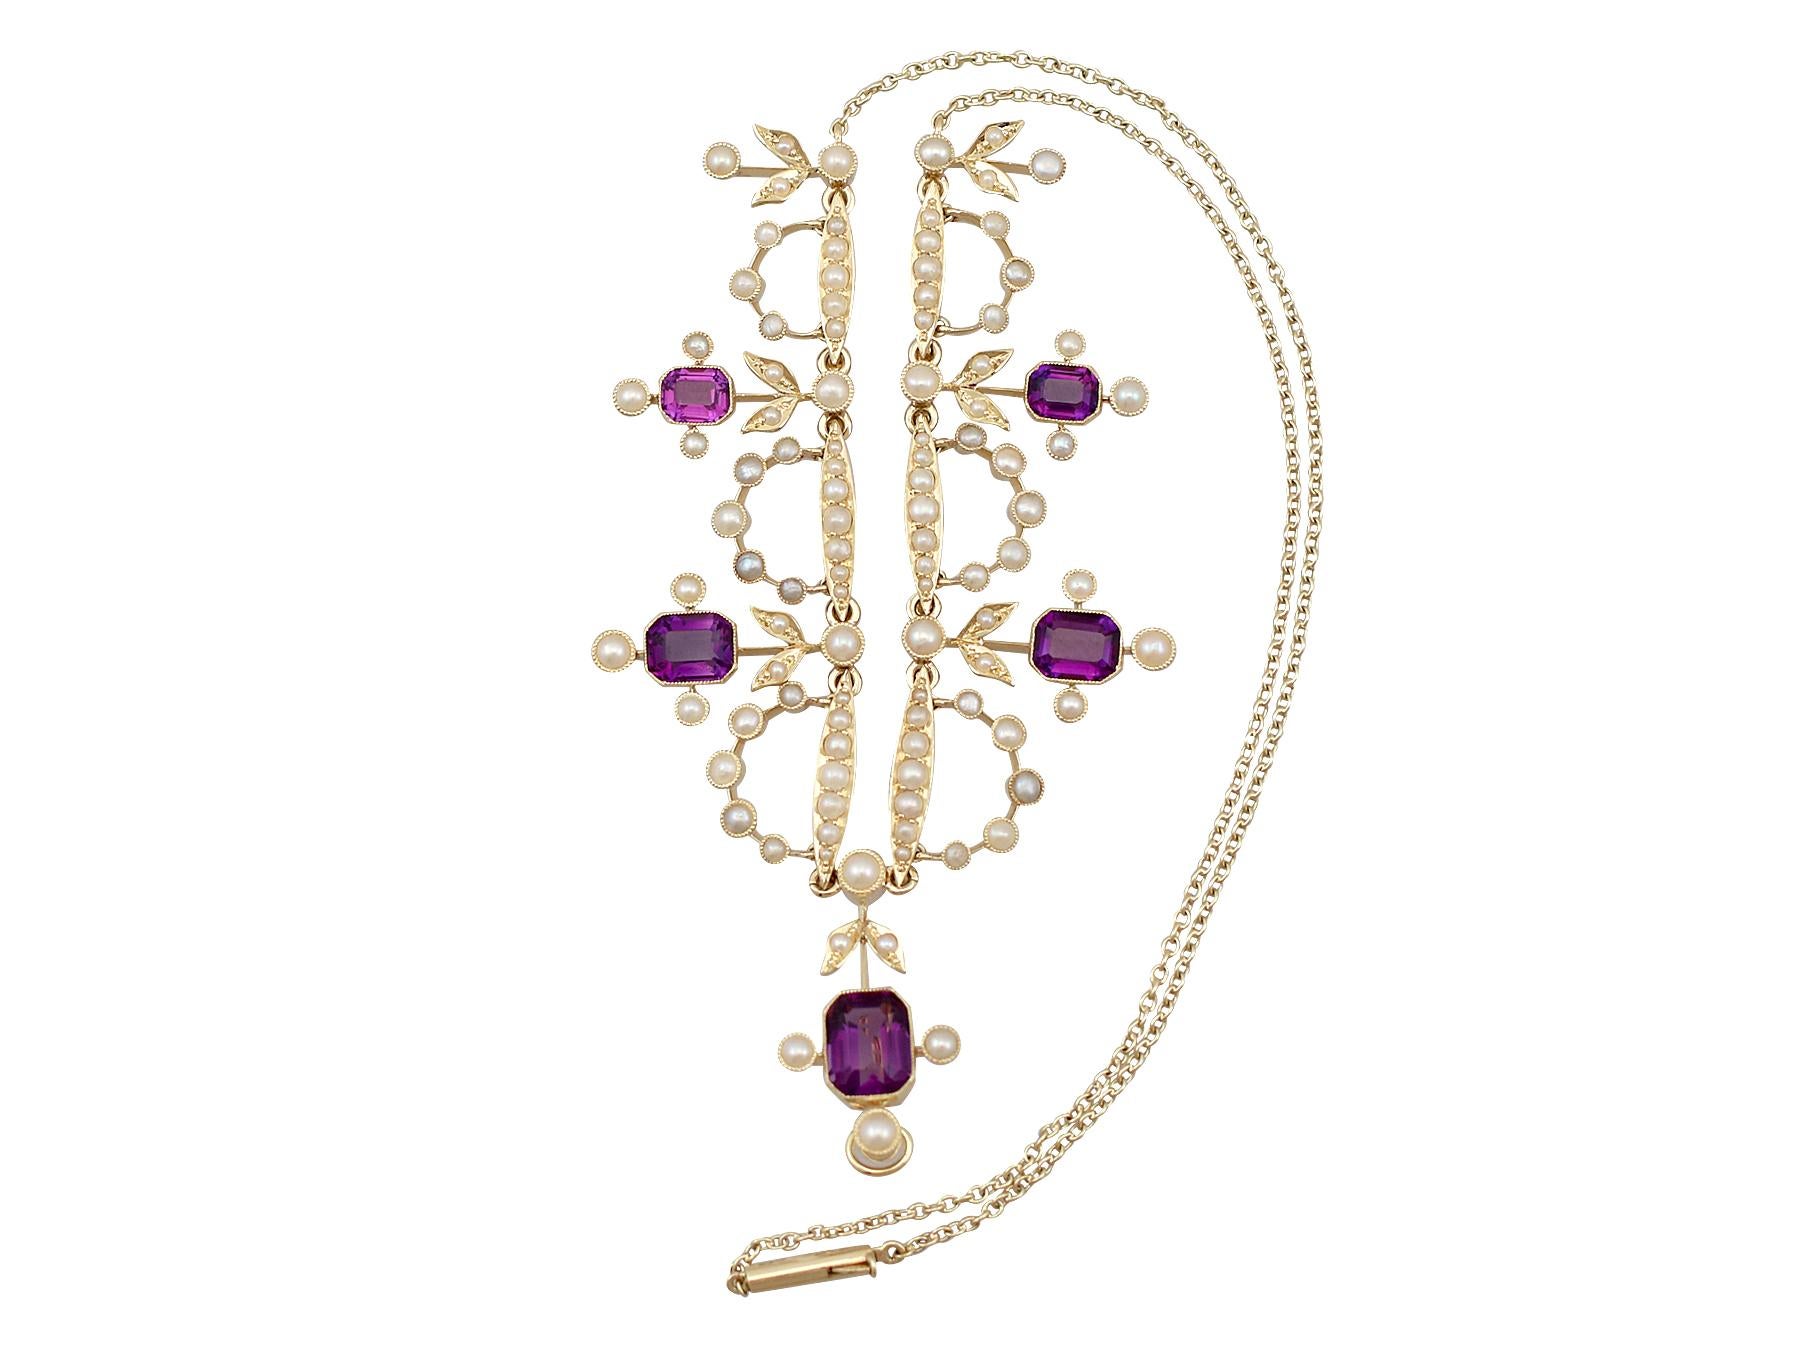 A stunning antique Edwardian 4.47 carat amethyst and Seed Pearl, 15 karat yellow gold necklace; part of our diverse antique jewelry and estate jewelry collections.

This stunning, fine and impressive Edwardian amethyst necklace has been crafted in